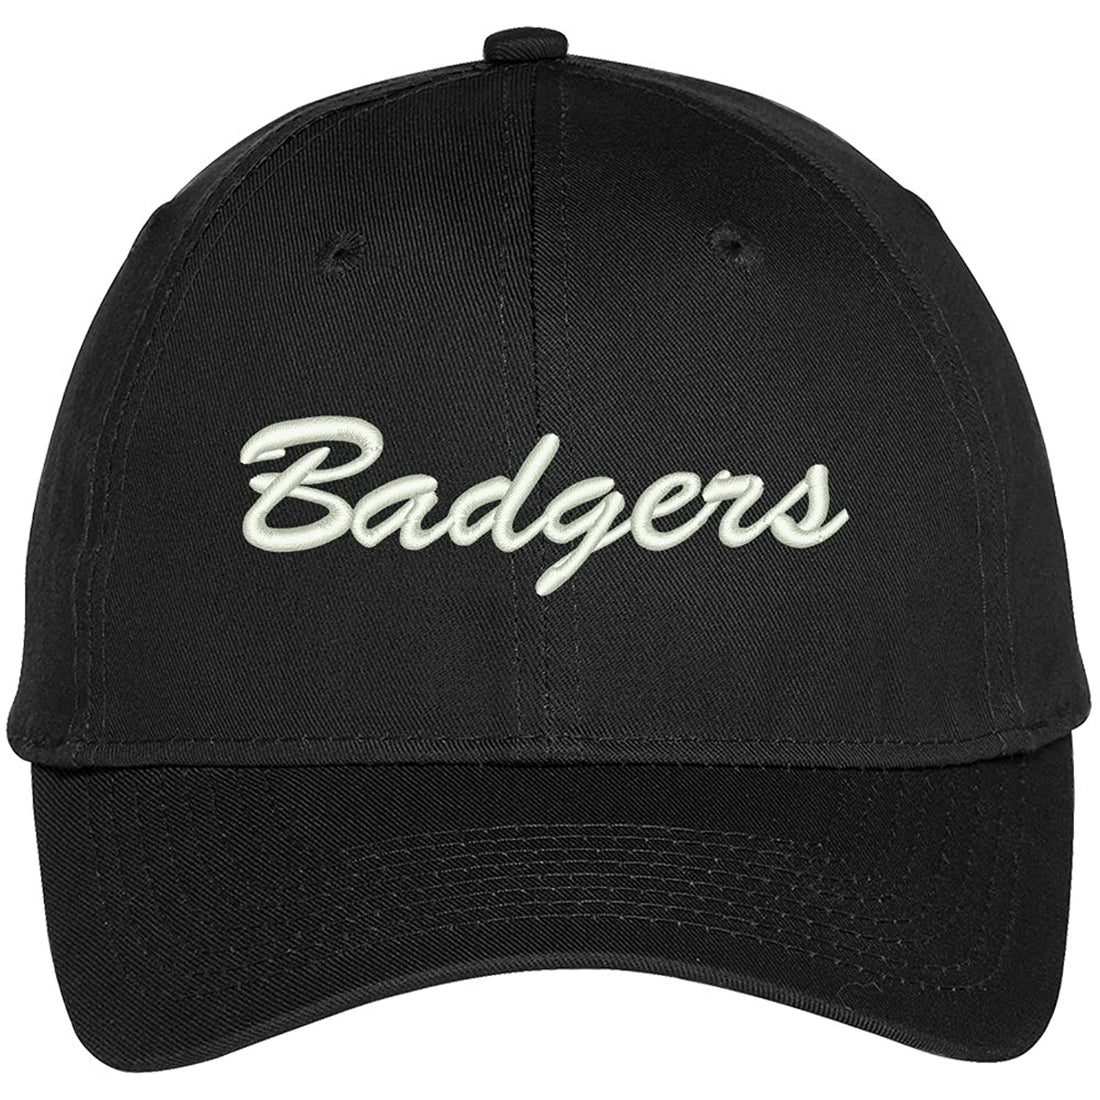 Trendy Apparel Shop Badgers Embroidered Team Nickname Mascot Cap